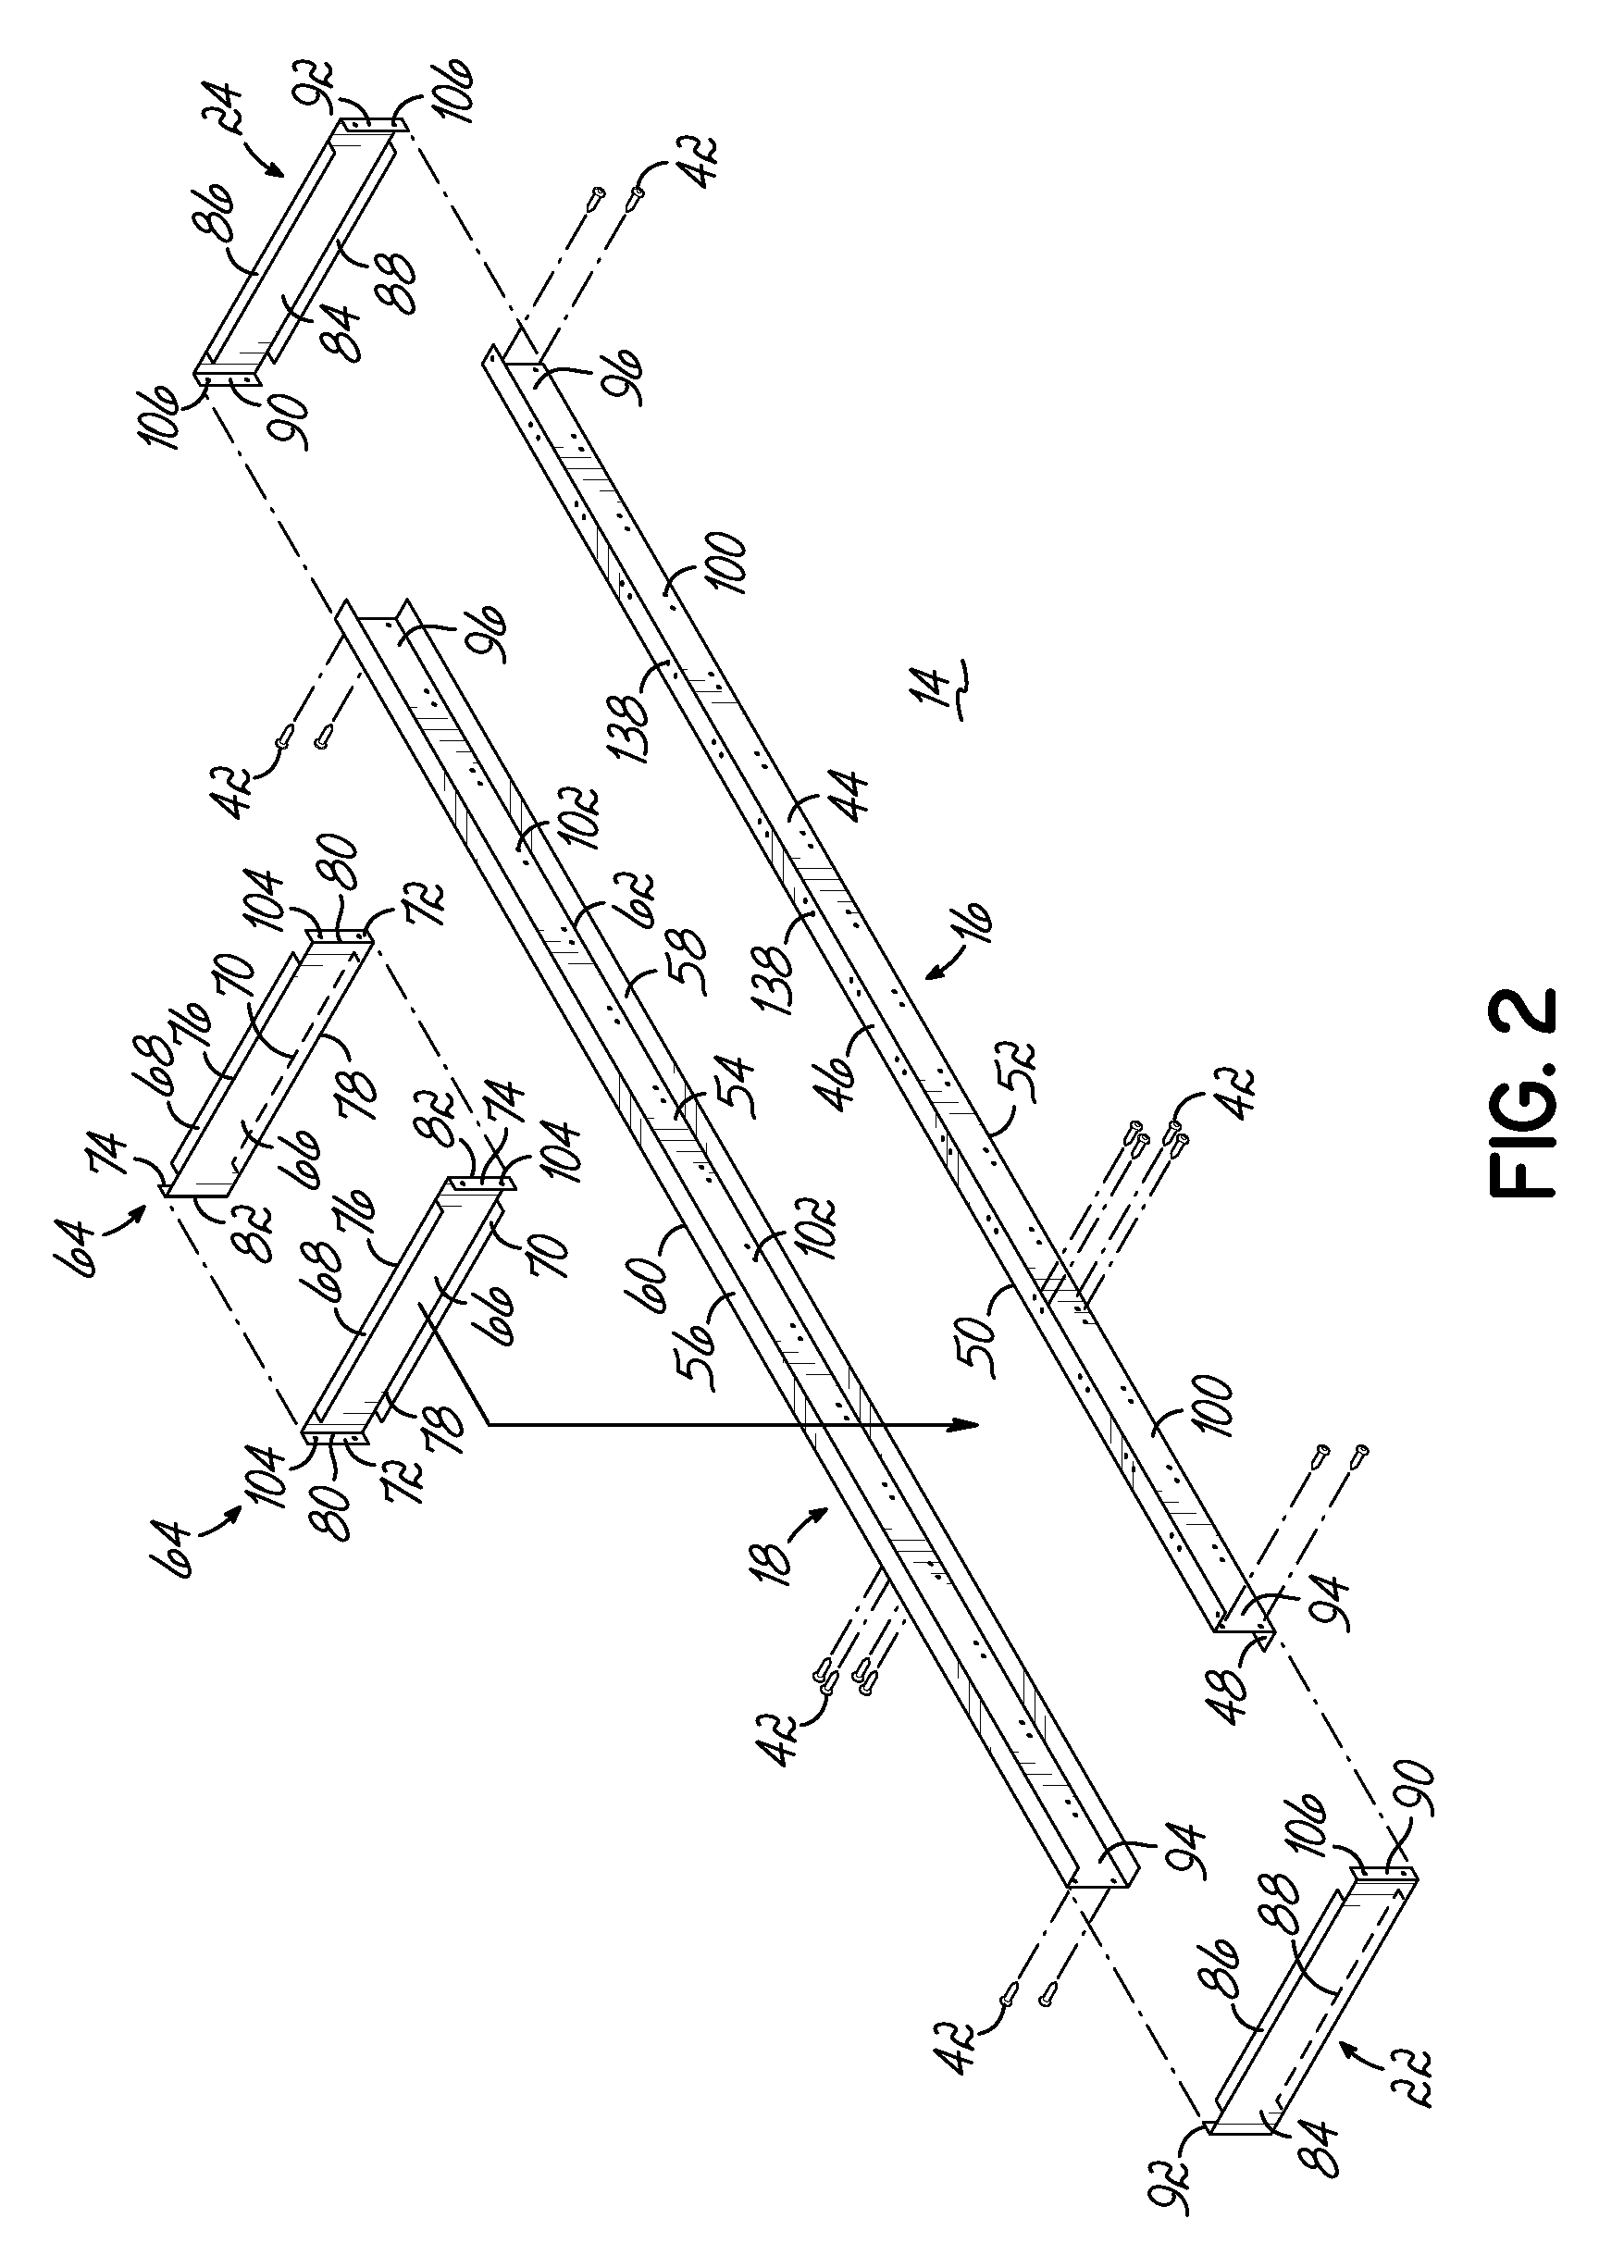 Platform assembly for supporting cabinets